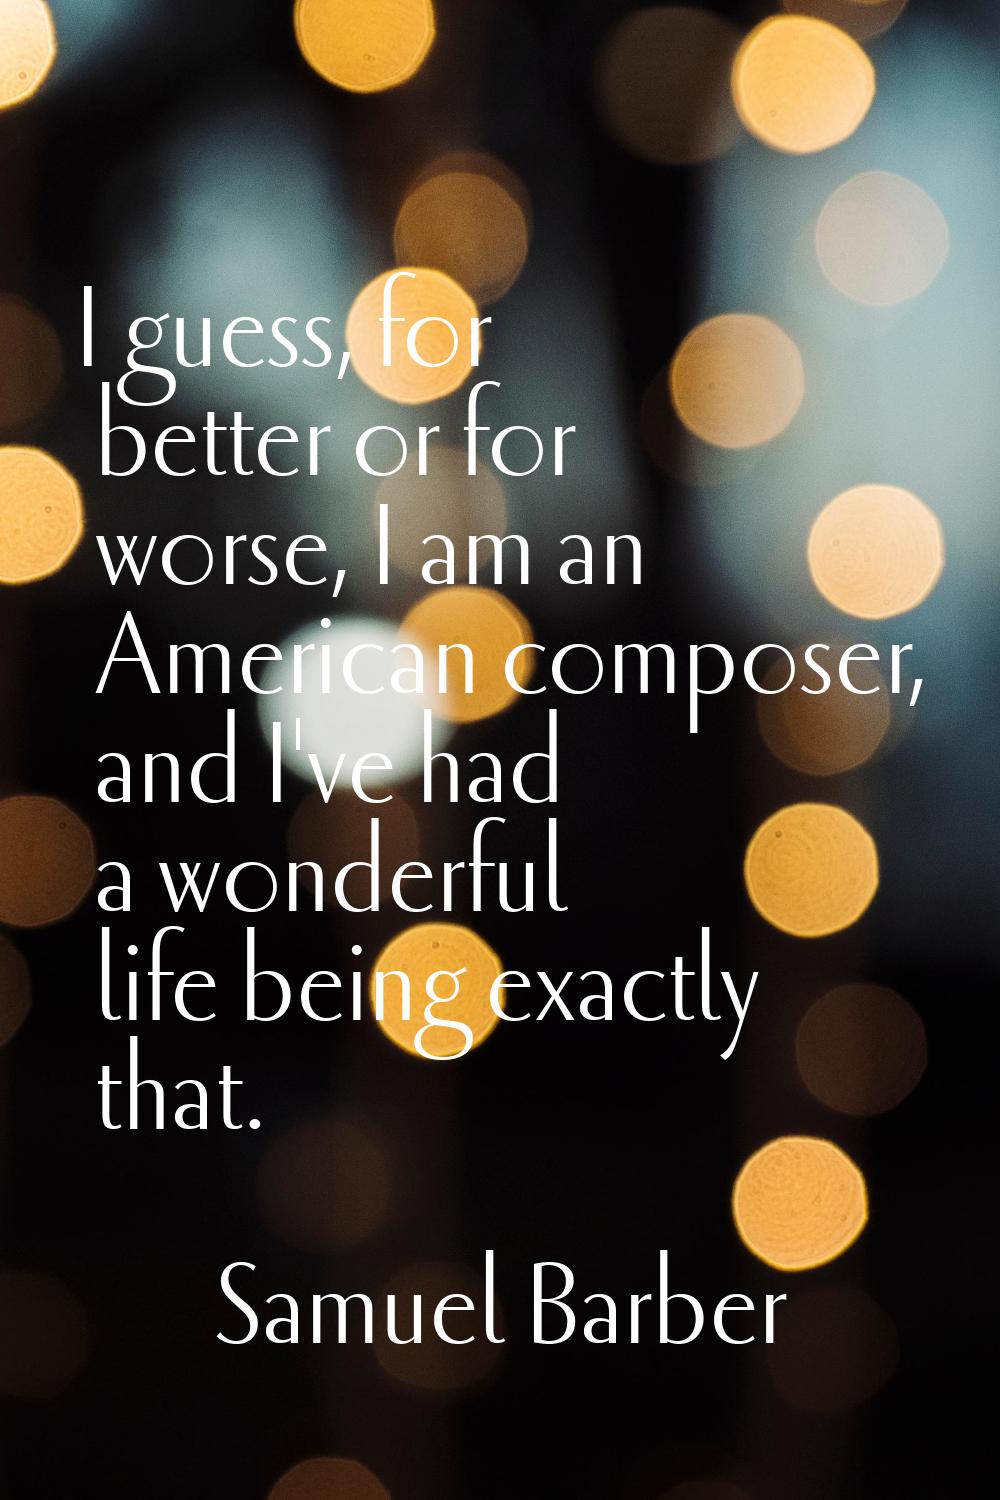 I guess, for better or for worse, I am an American composer, and I've had a wonderful life being ex